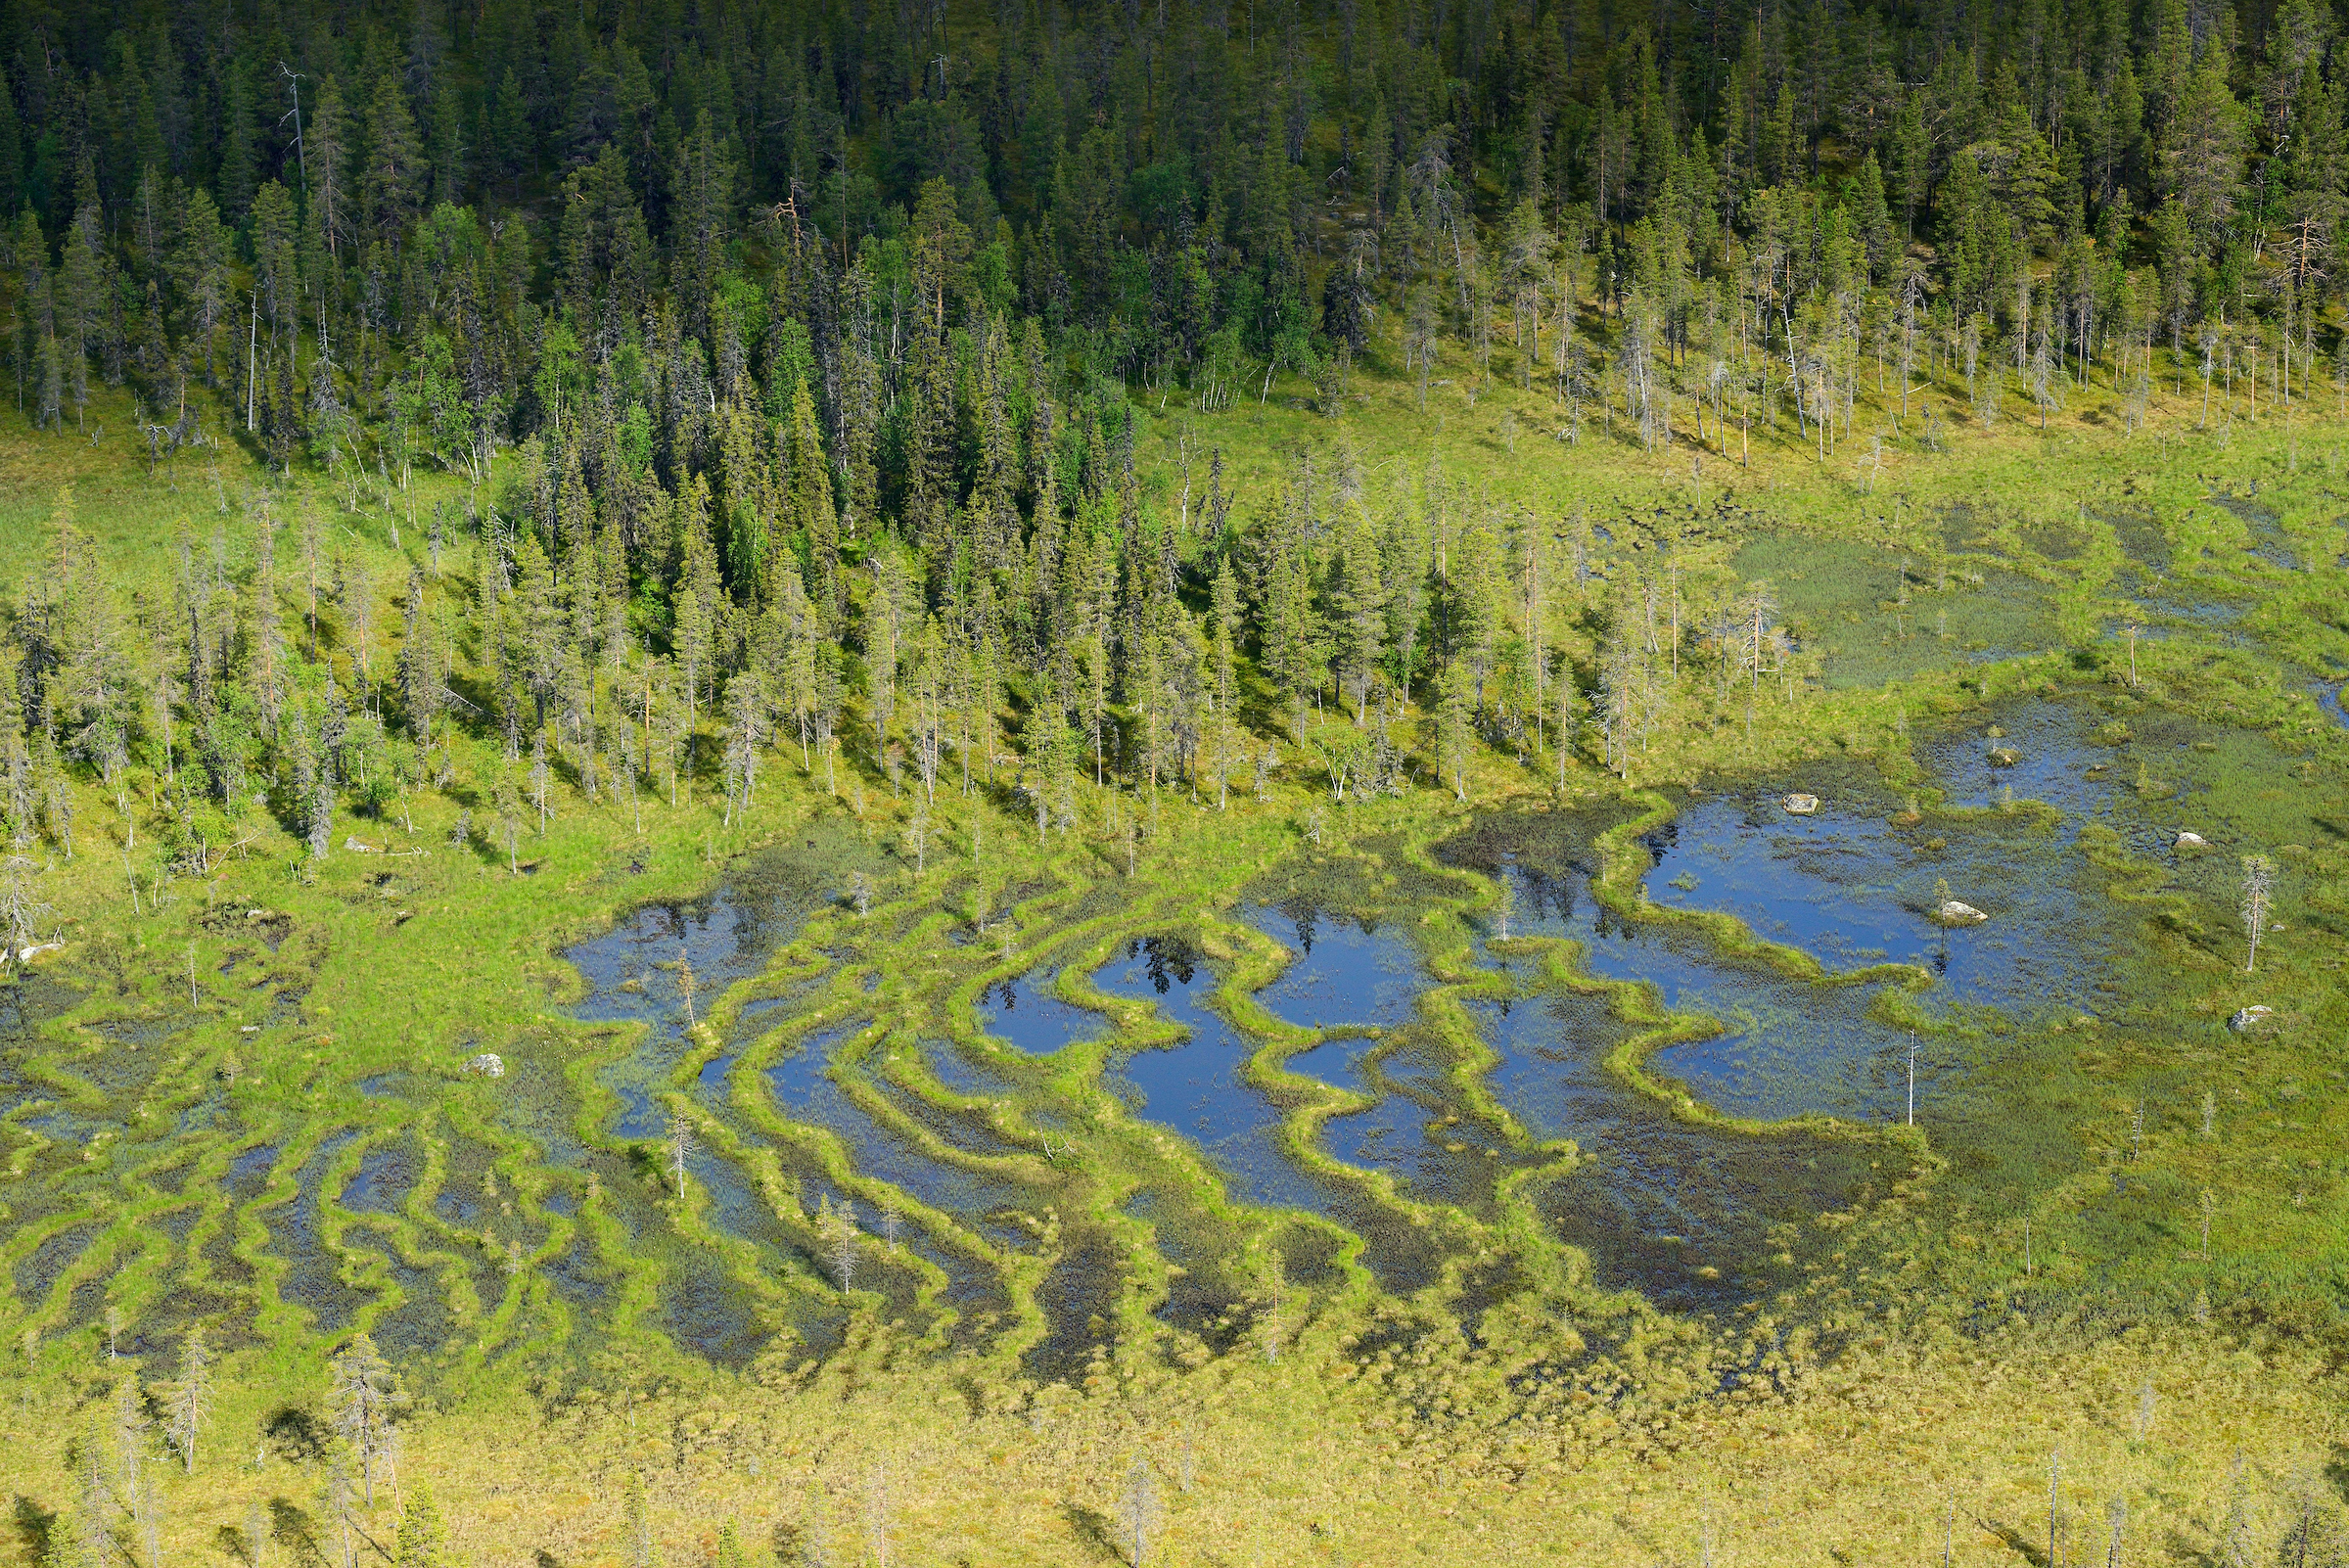 A healthy peat landscape, Norrbotten County, Sweden. Arctic and sub-arctic peat landscapes can be restored, if the right conditions for recovery can be put in place.